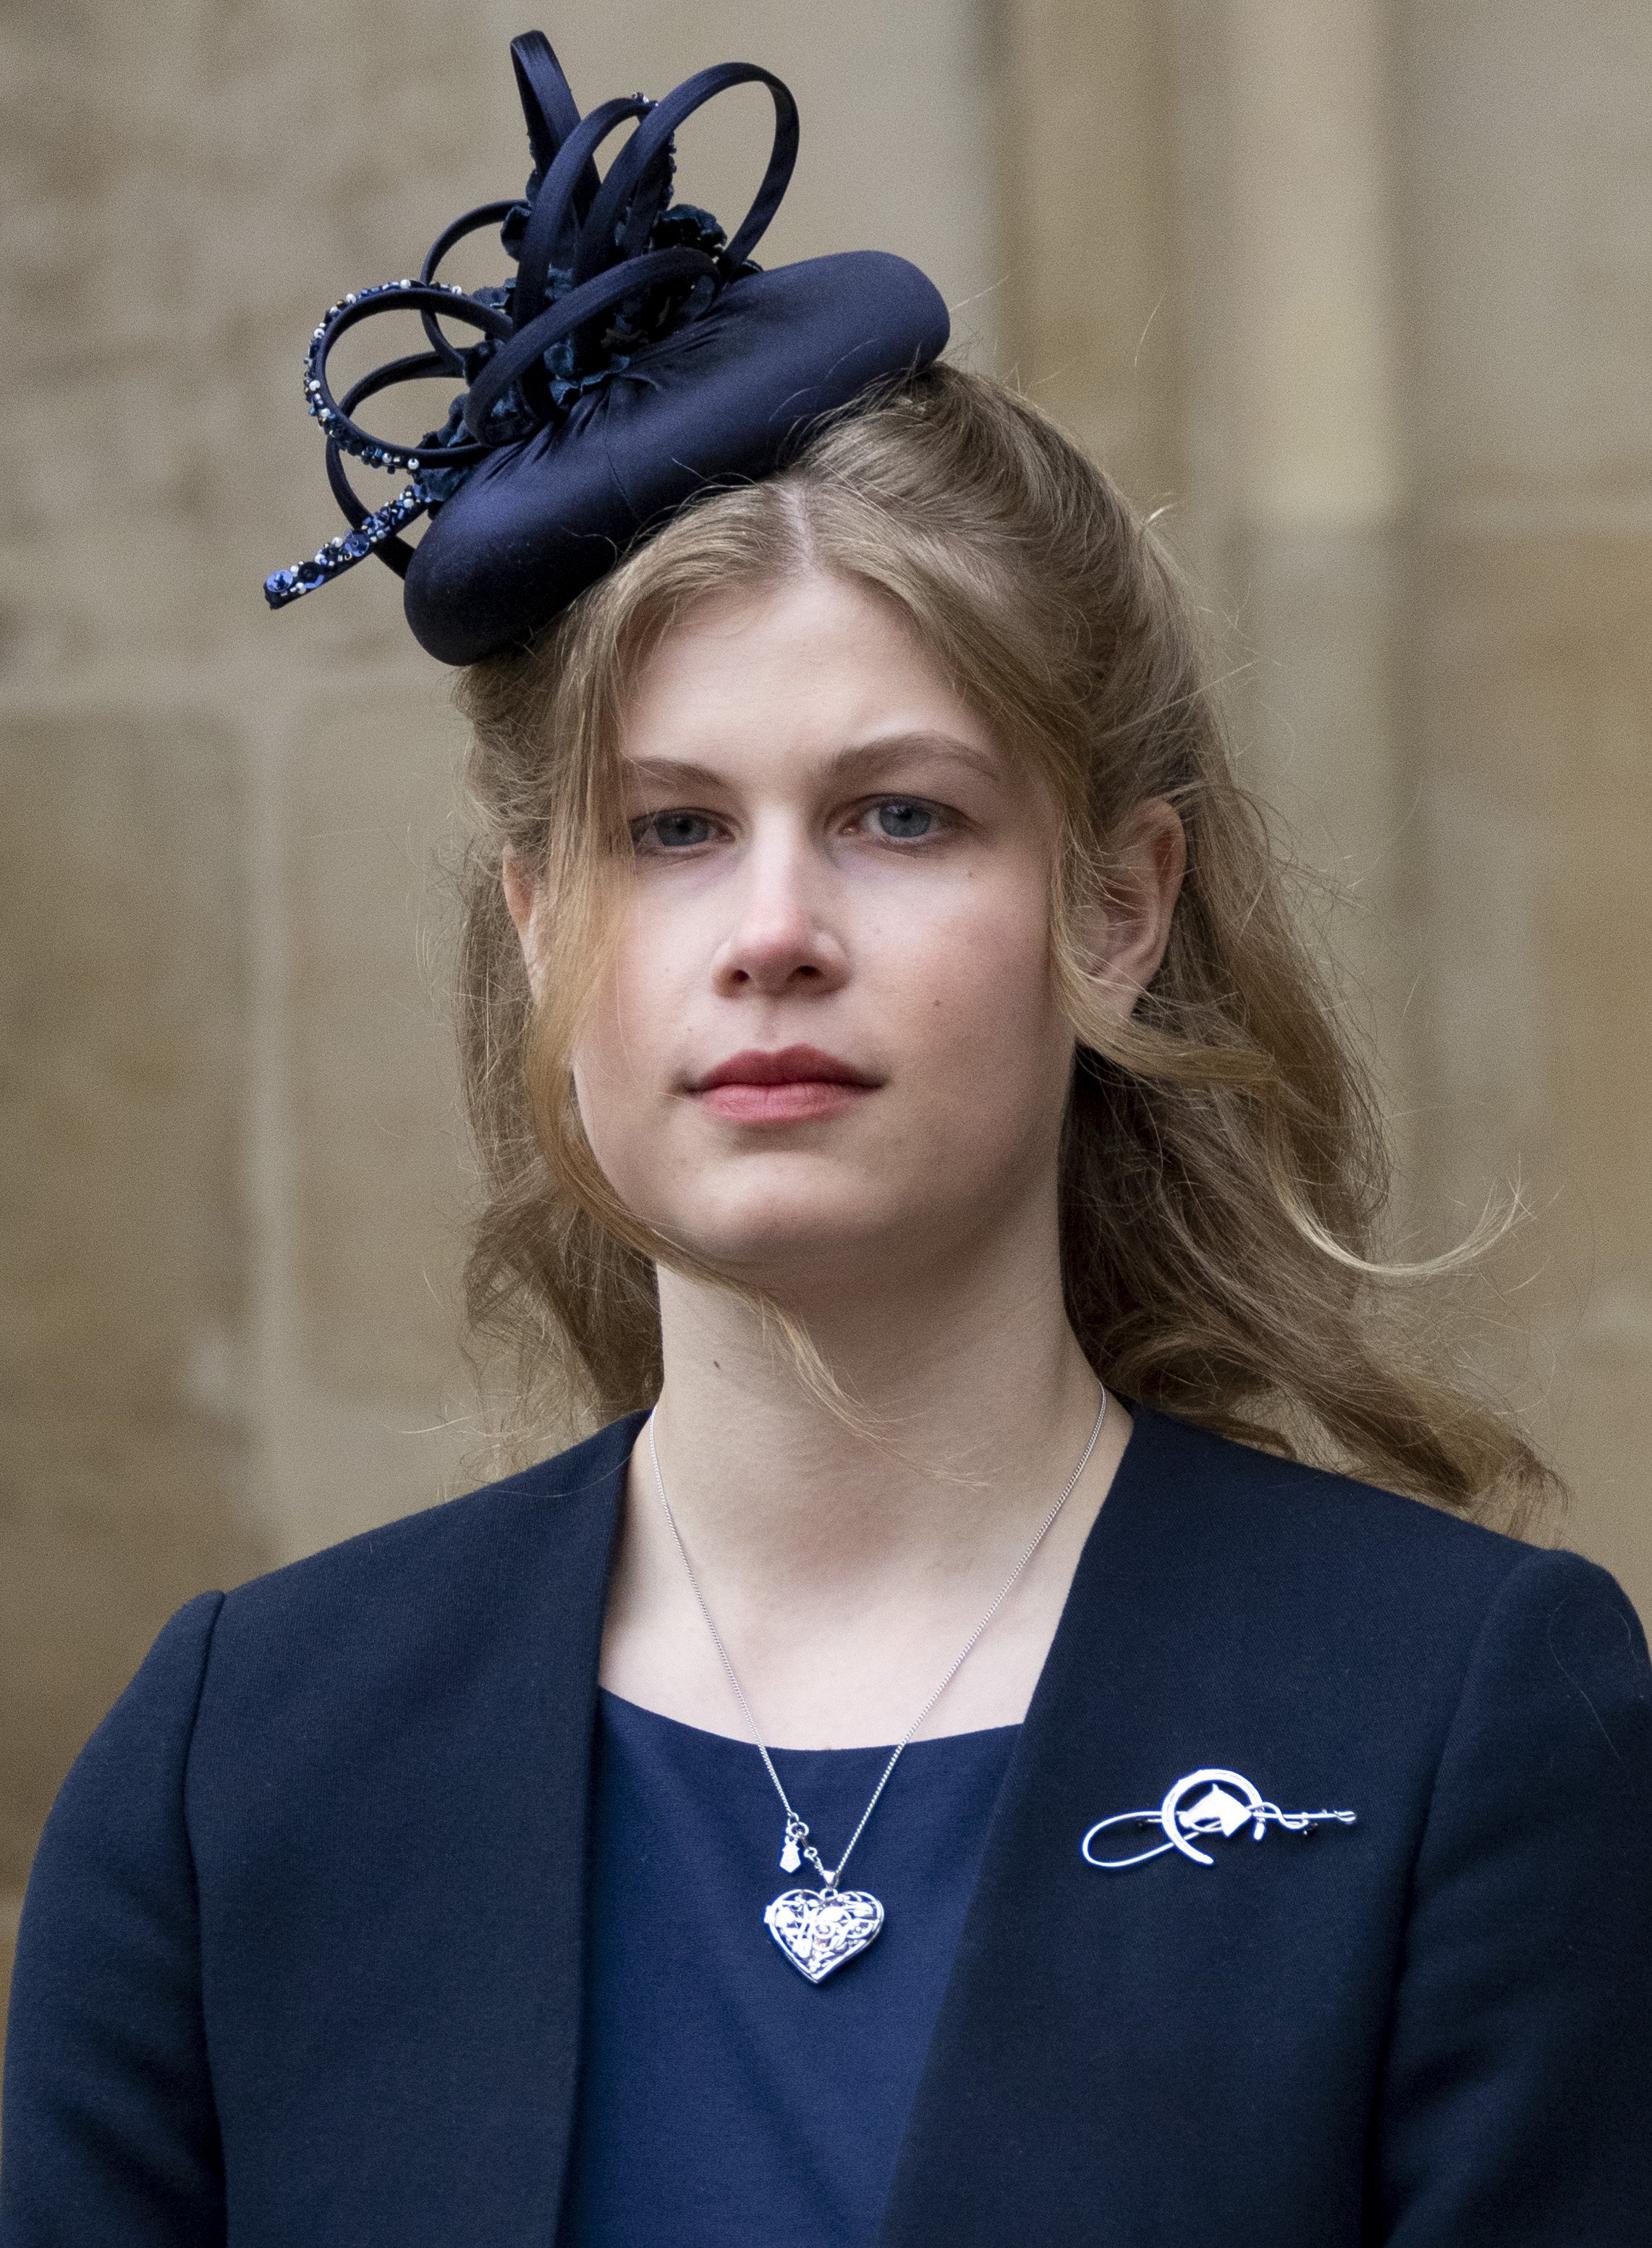  Lady Louise Windsor attends a memorial service for the Duke of Edinburgh at Westminster Abbey on March 29, 2022 in London, England | Source: Getty Images